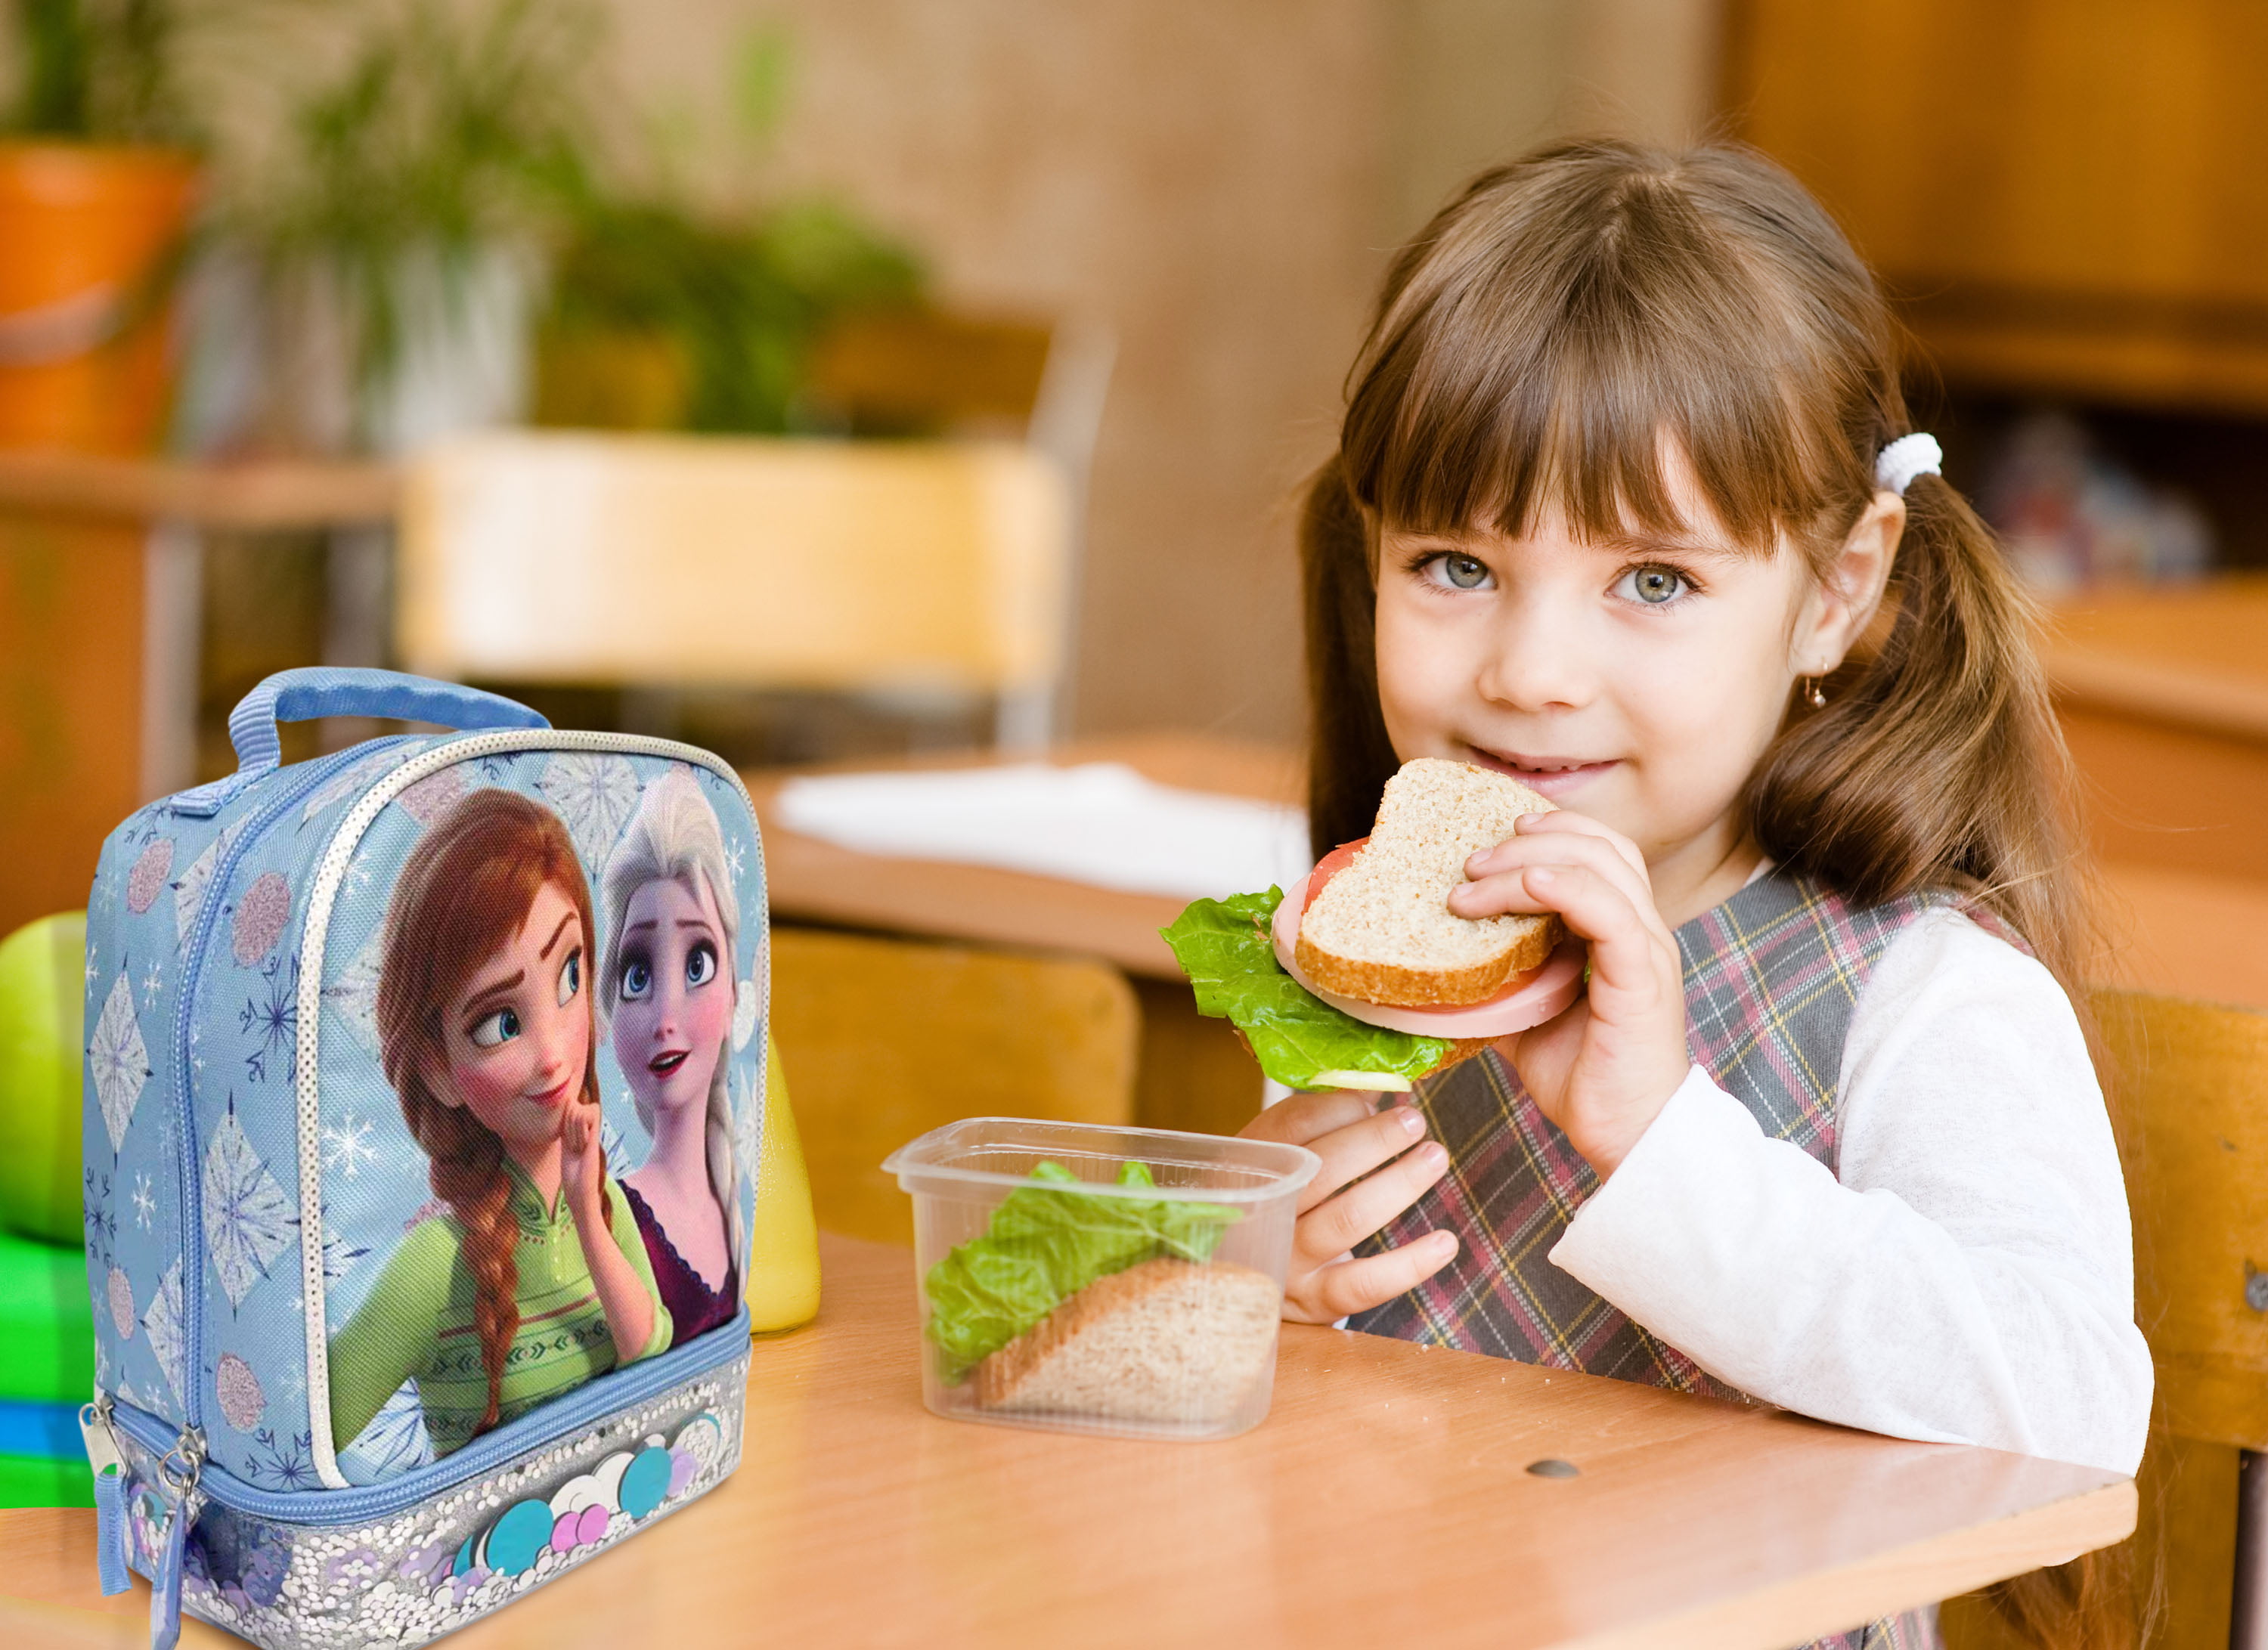 Toddler Girls Frozen Lunch Box  The Children's Place - MULTI CLR